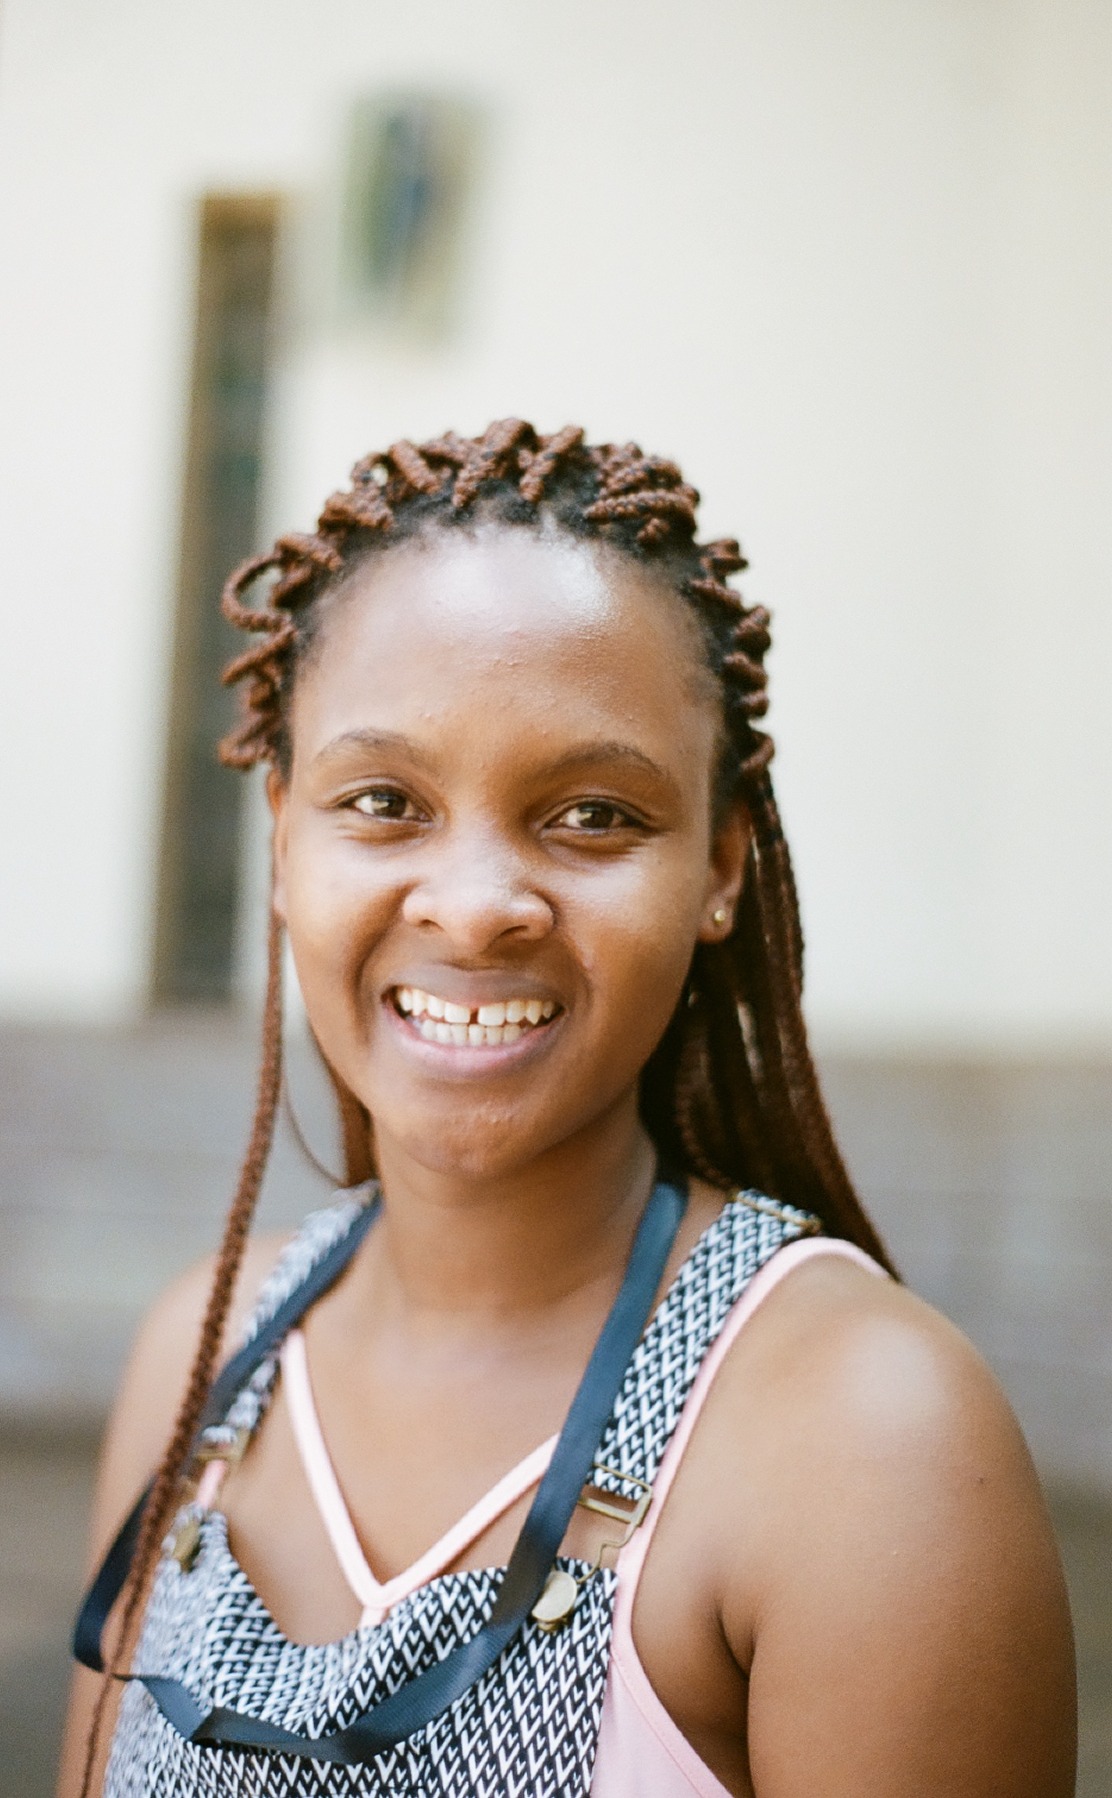 Photo portrait of young African woman smiling with braids and a patterned dungary